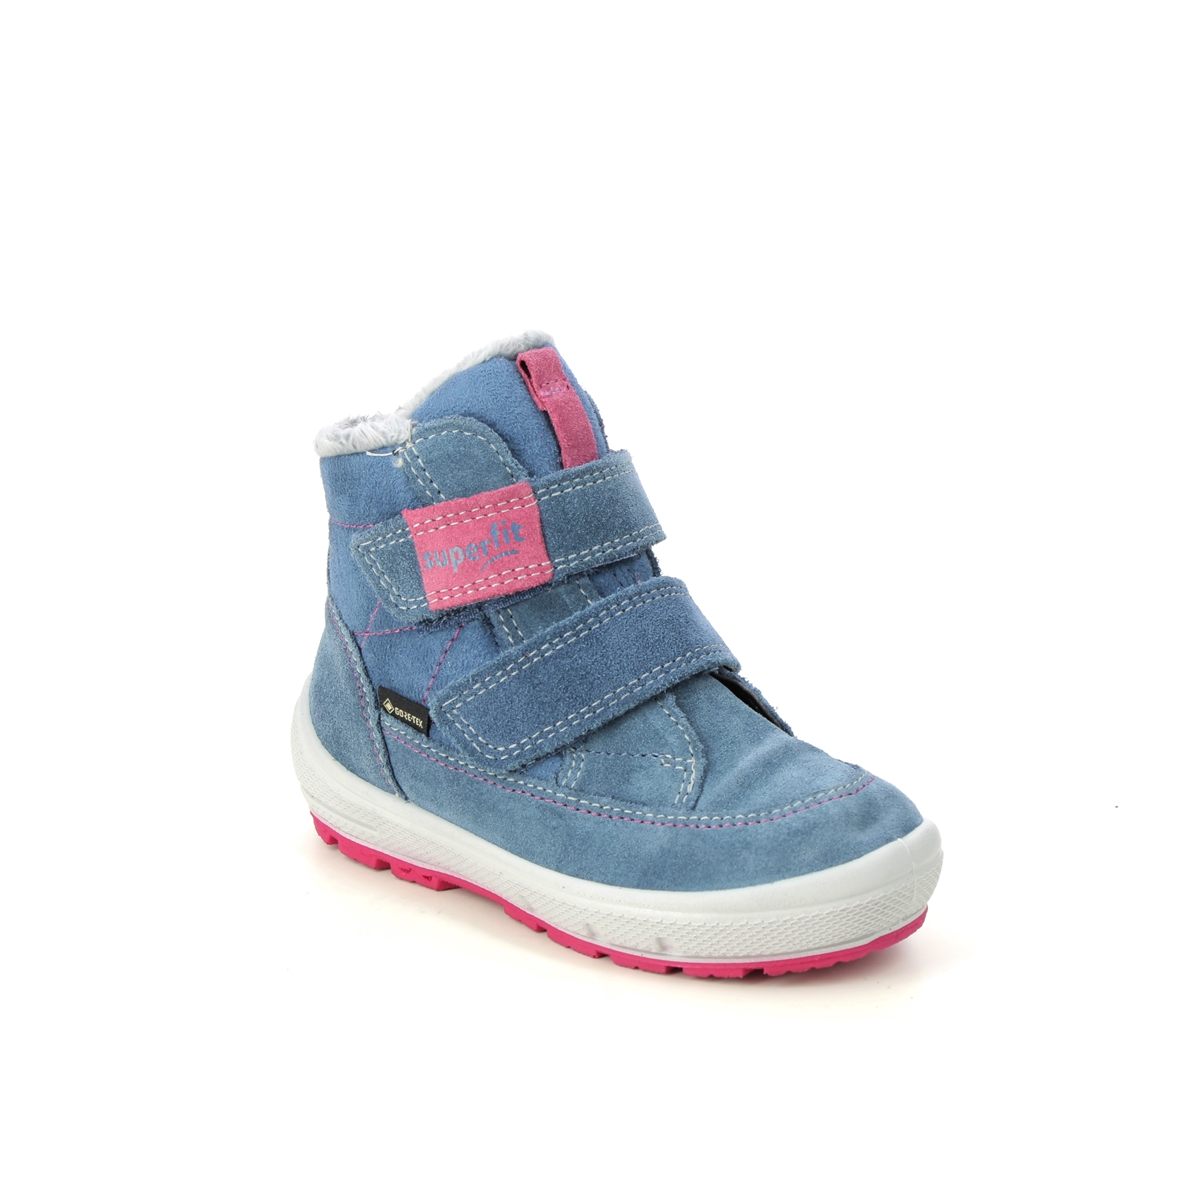 Superfit Groovy Gtx Blue Suede Kids Toddler Girls Boots 1009314-8020 In Size 25 In Plain Blue Suede